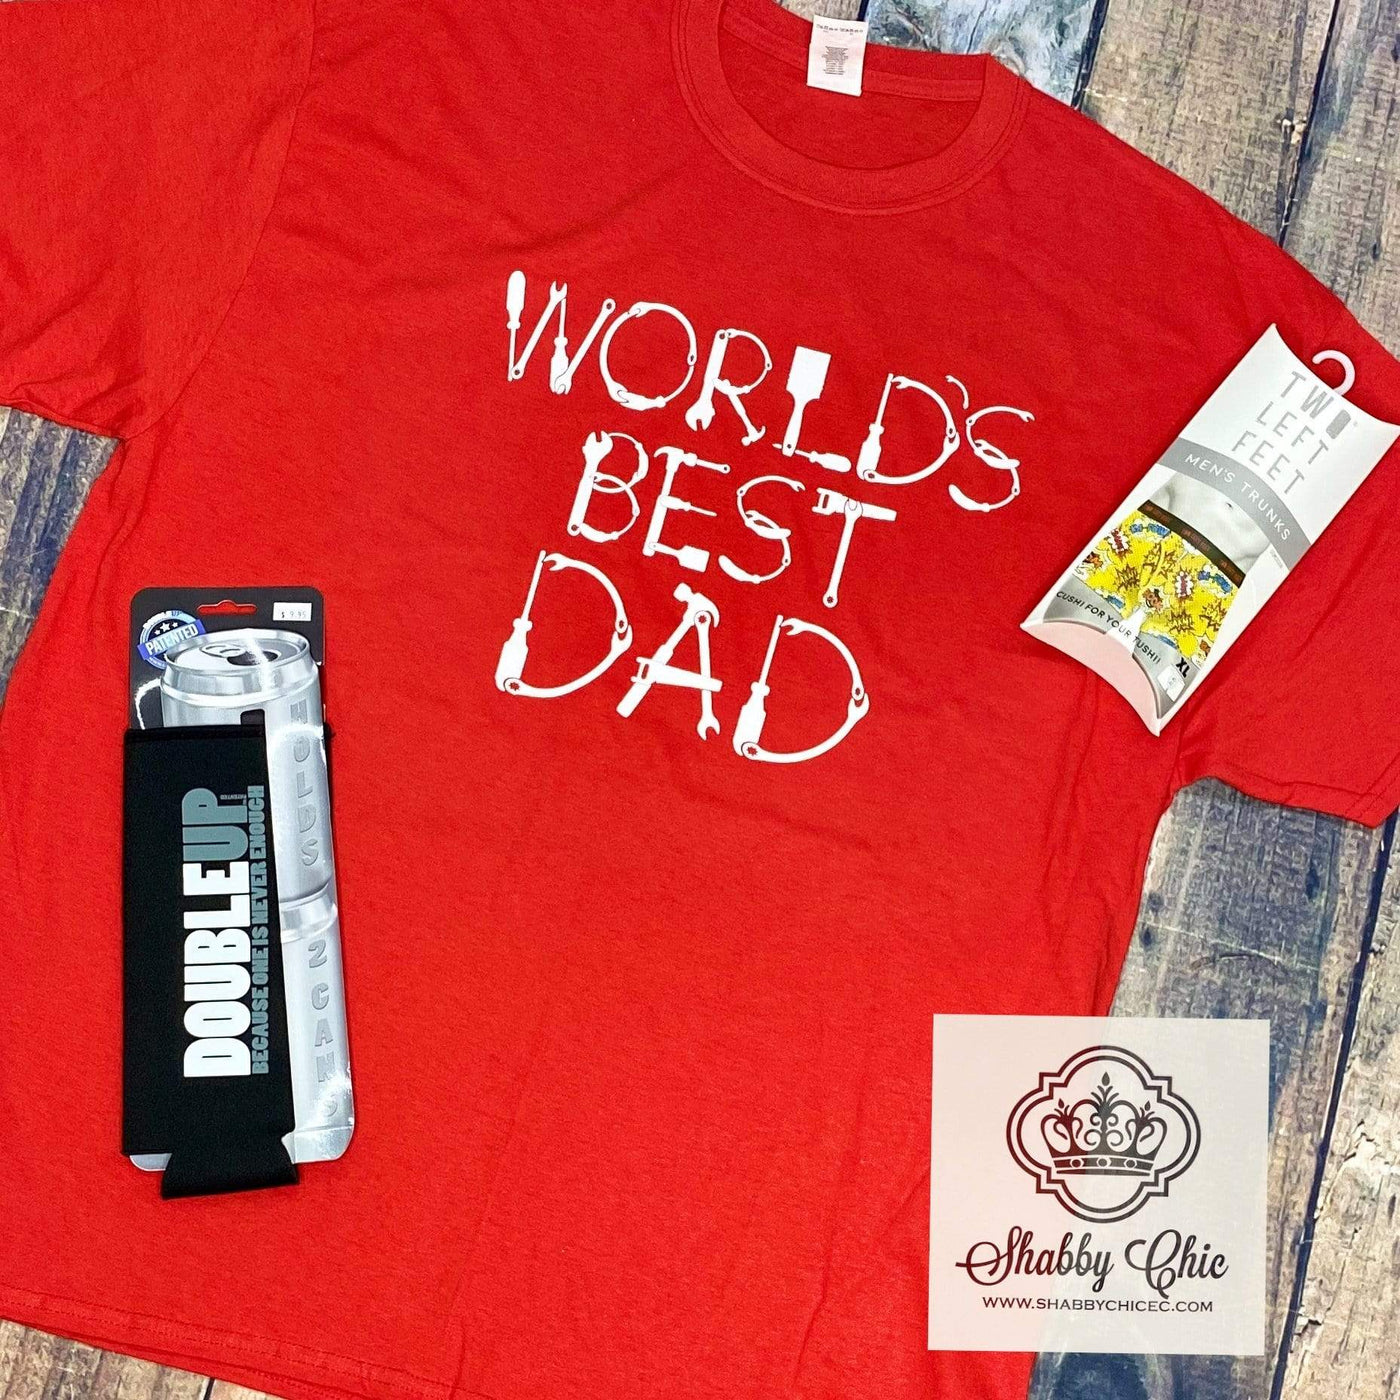 World's Best Dad Shabby Chic Boutique and Tanning Salon